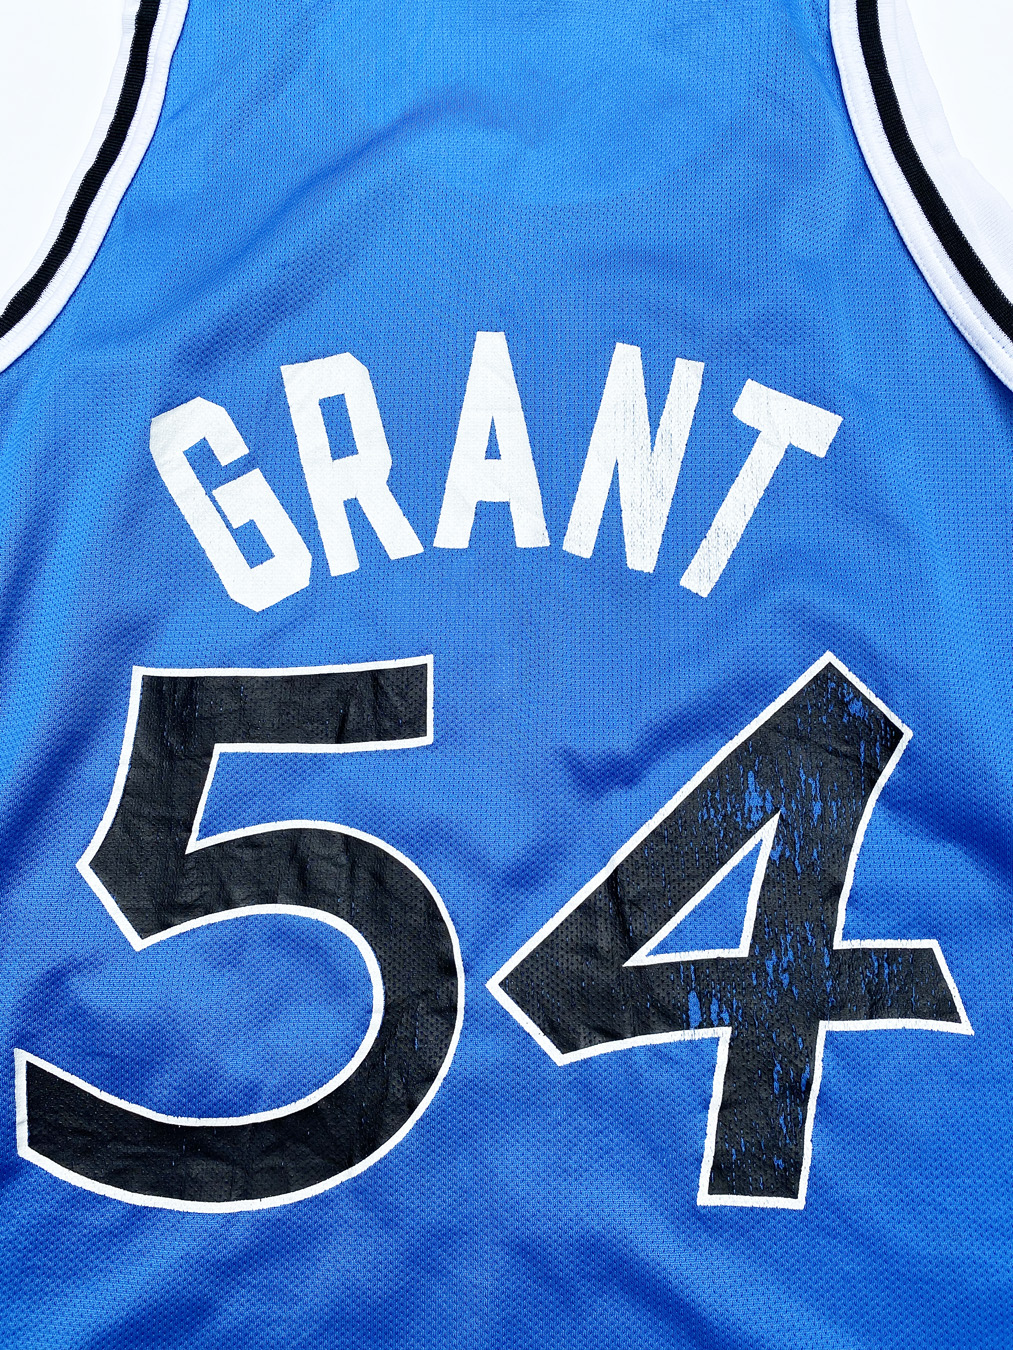 Magic Horace Grant Jersey size 40/M – Mr. Throwback NYC